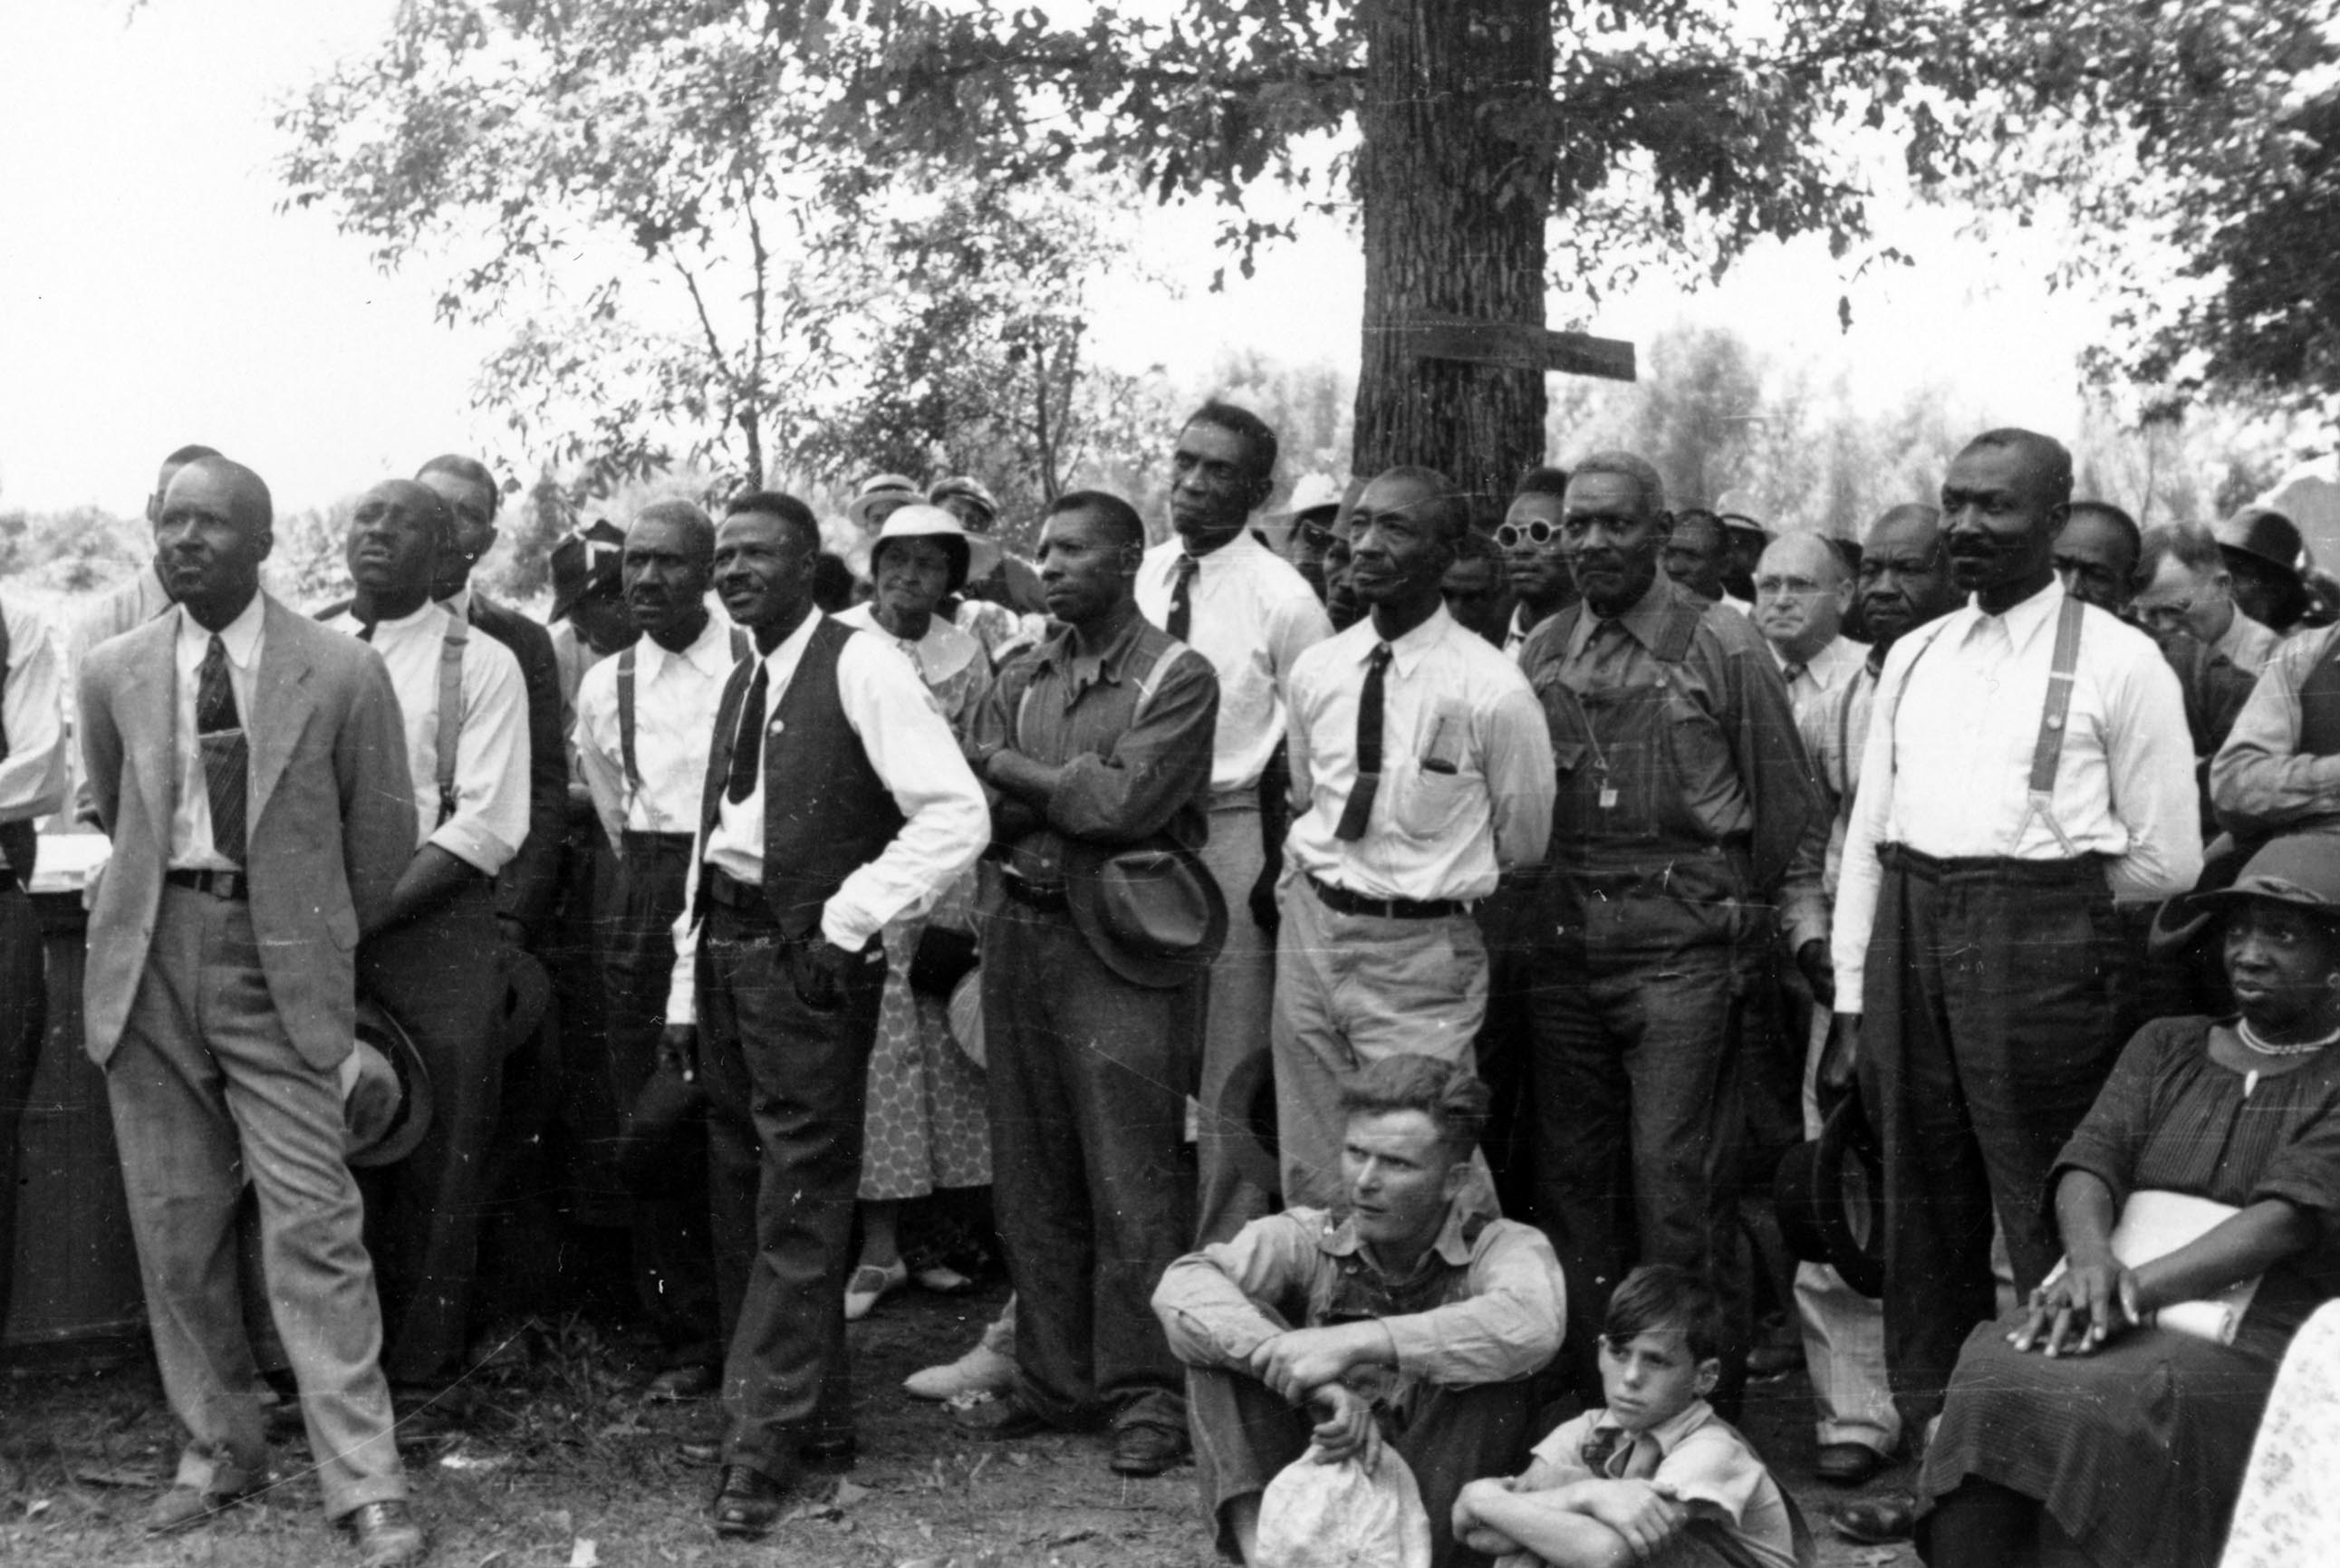 Southern Tenant Farmers’ Union: Black and White Unite? (Teaching Activity) | Zinn Education Project: Teaching People's History